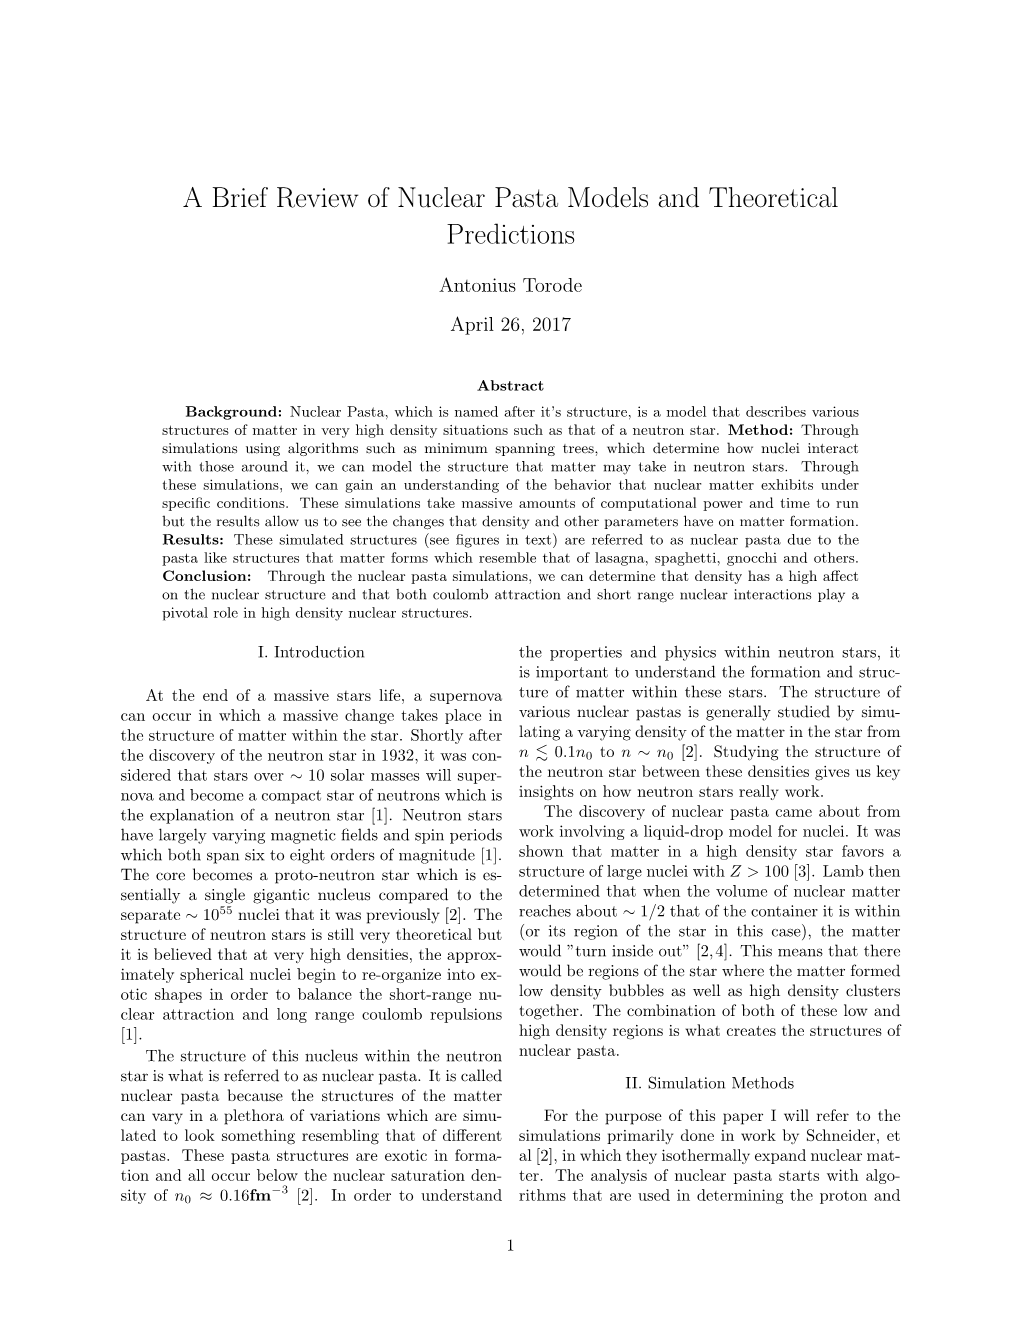 A Brief Review of Nuclear Pasta Models and Theoretical Predictions